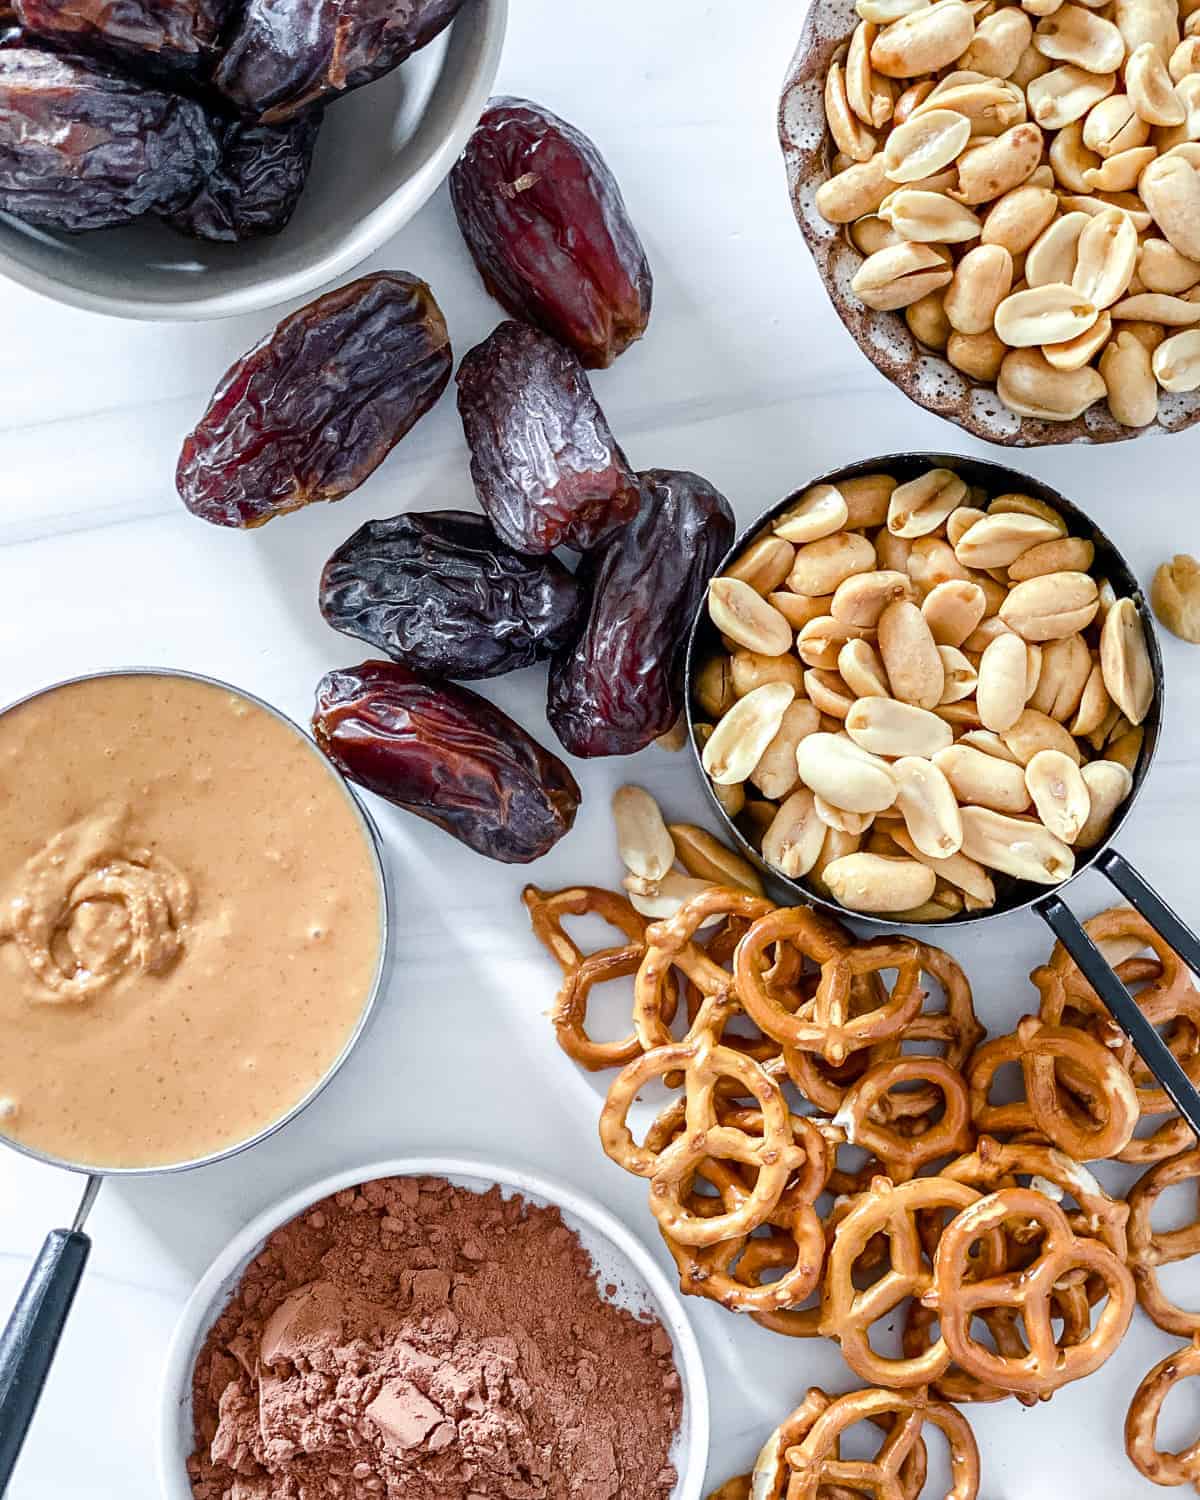 ingredients for Easy Chocolate Peanut Butter Pretzel Bars against a white surface